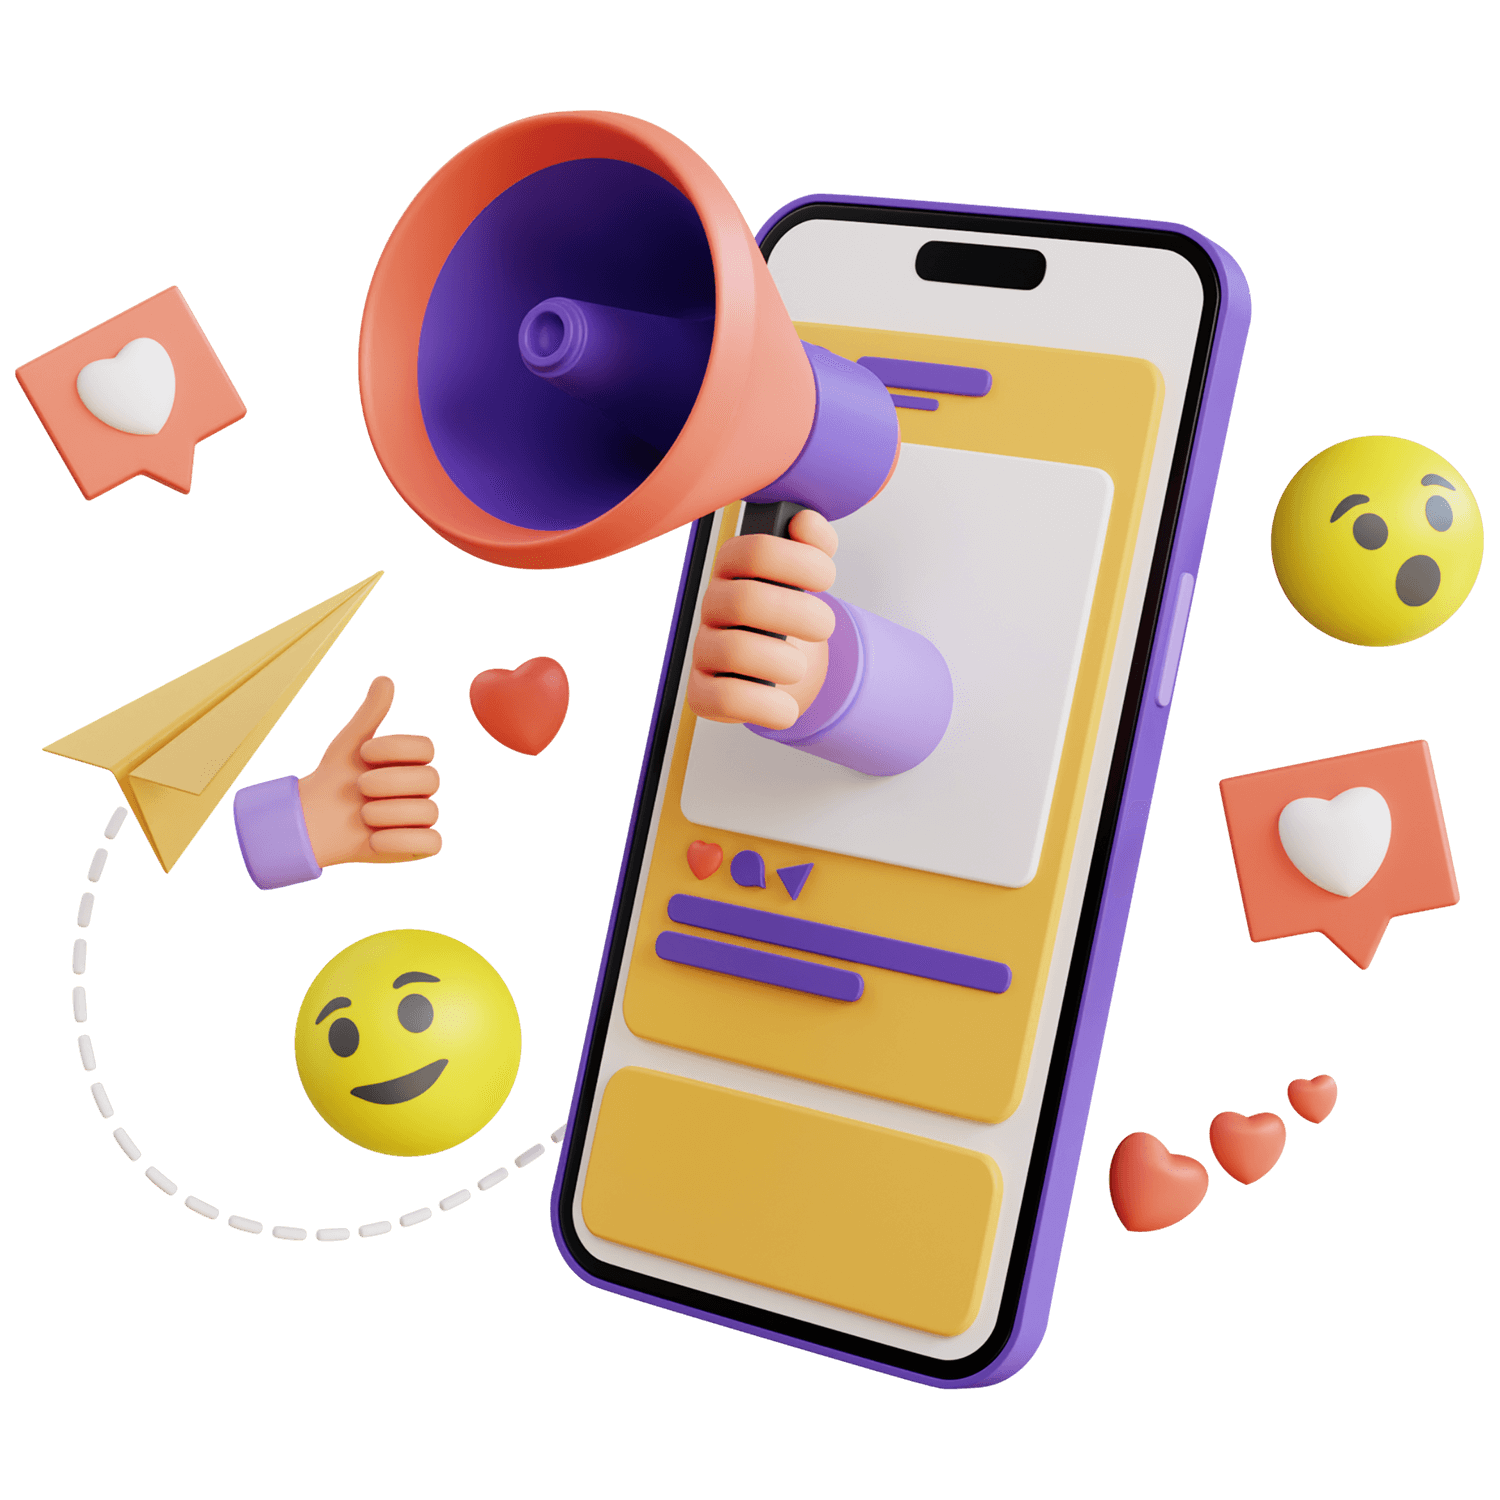 A purple and yellow smartphone depicting a hand with a megaphone coming out of the screen. Emojis portraying reactions, messages, notifications and more floating around it.